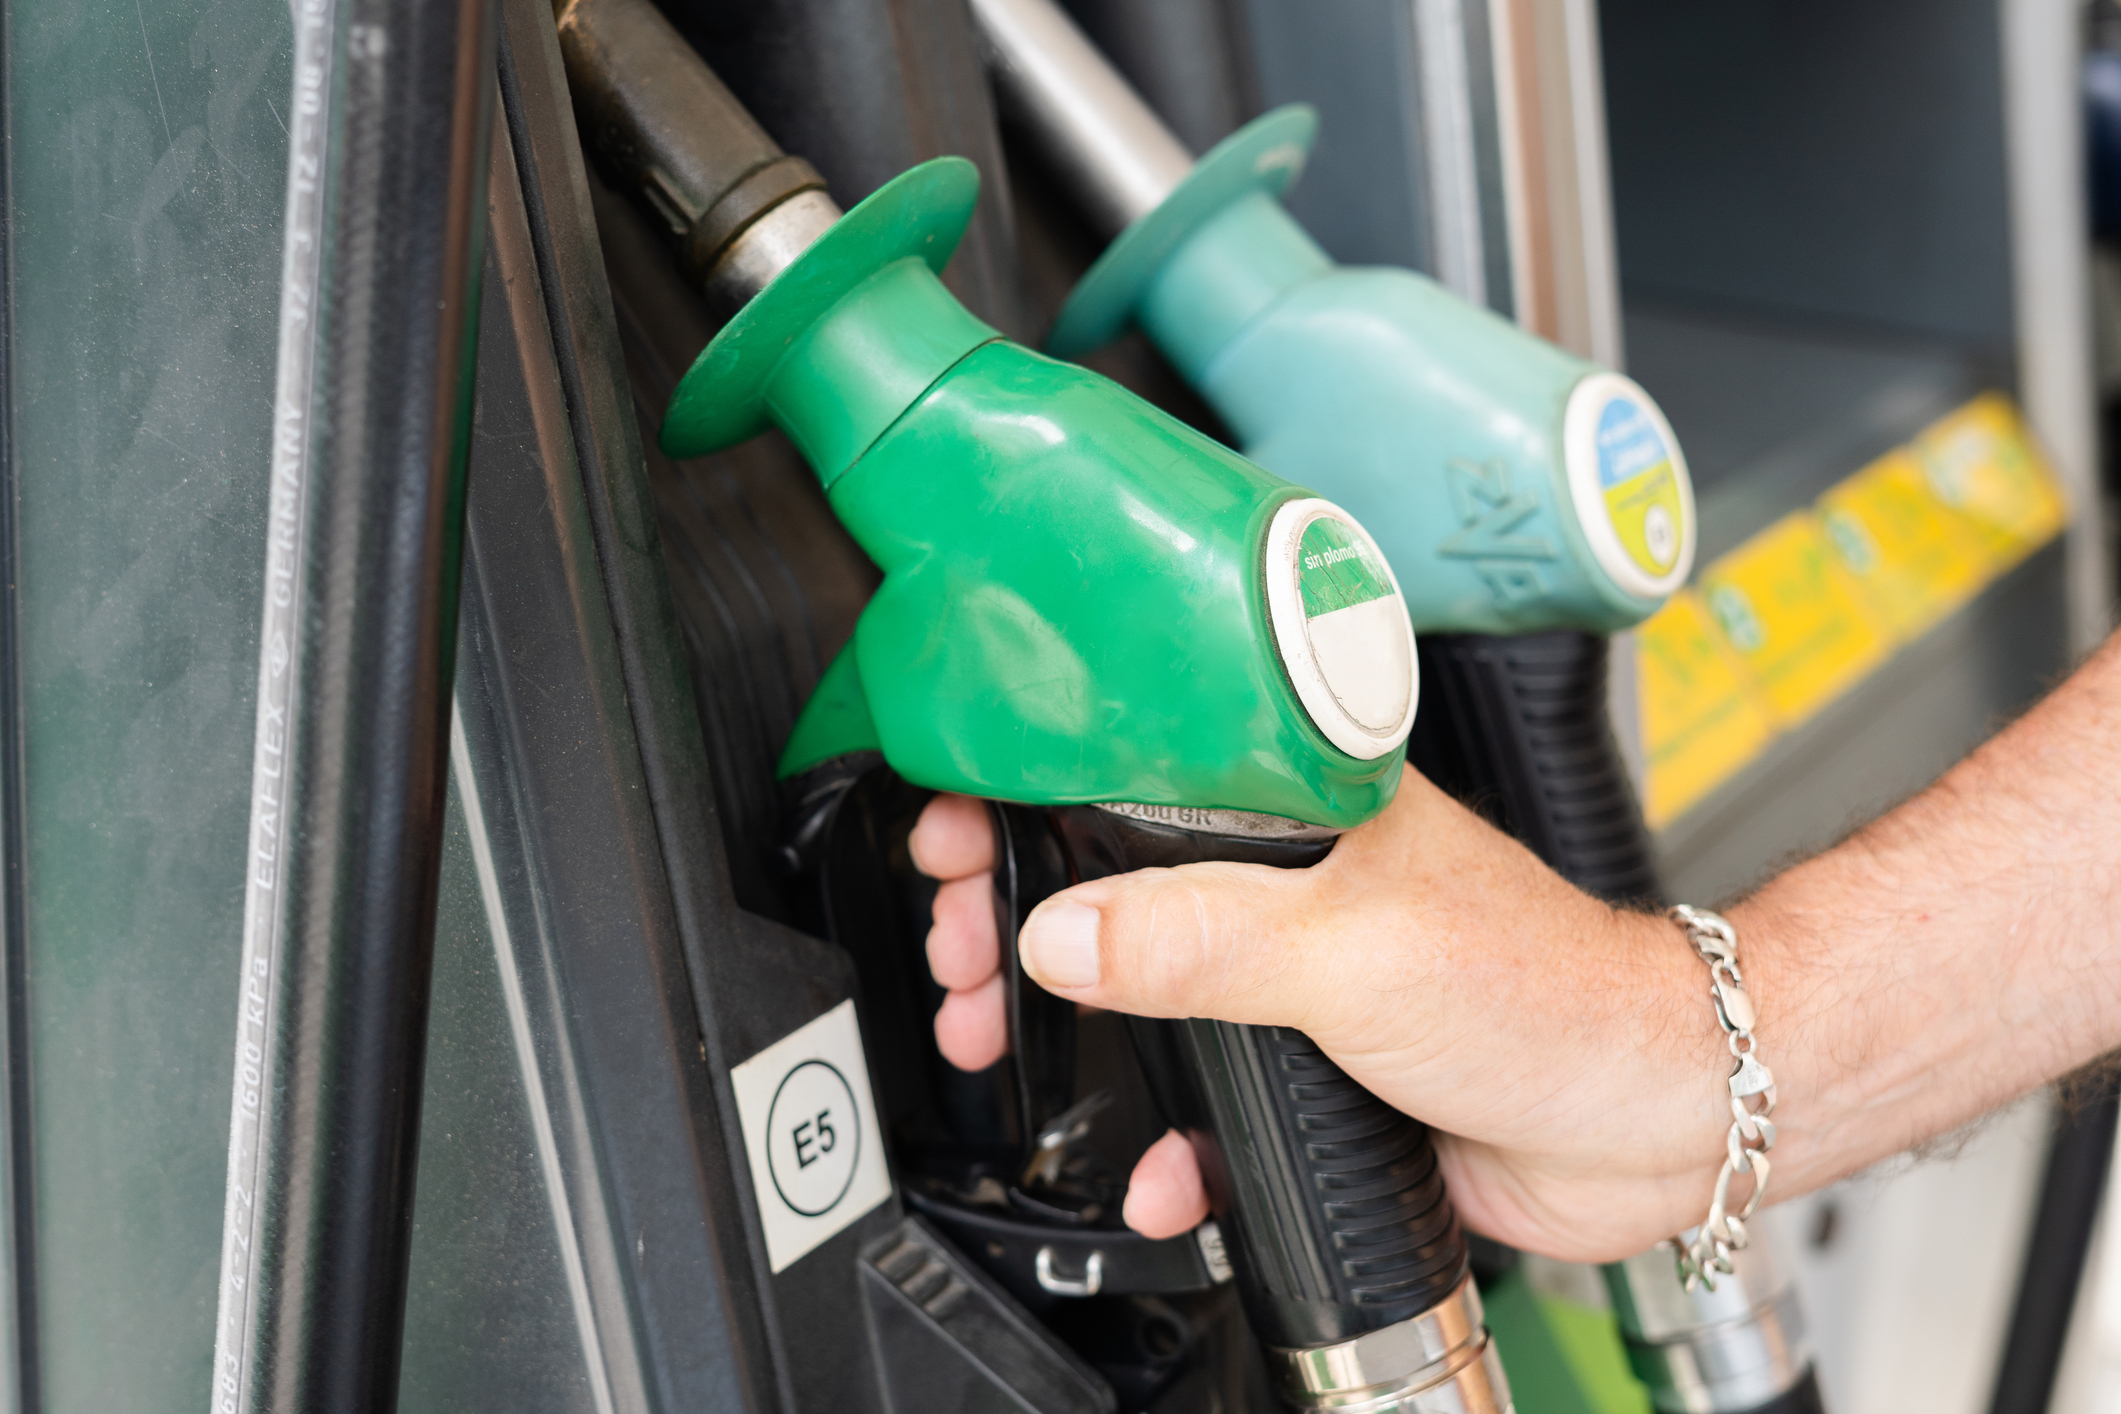 A hand holds a green fuel pump nozzle next to another nozzle at a gas station